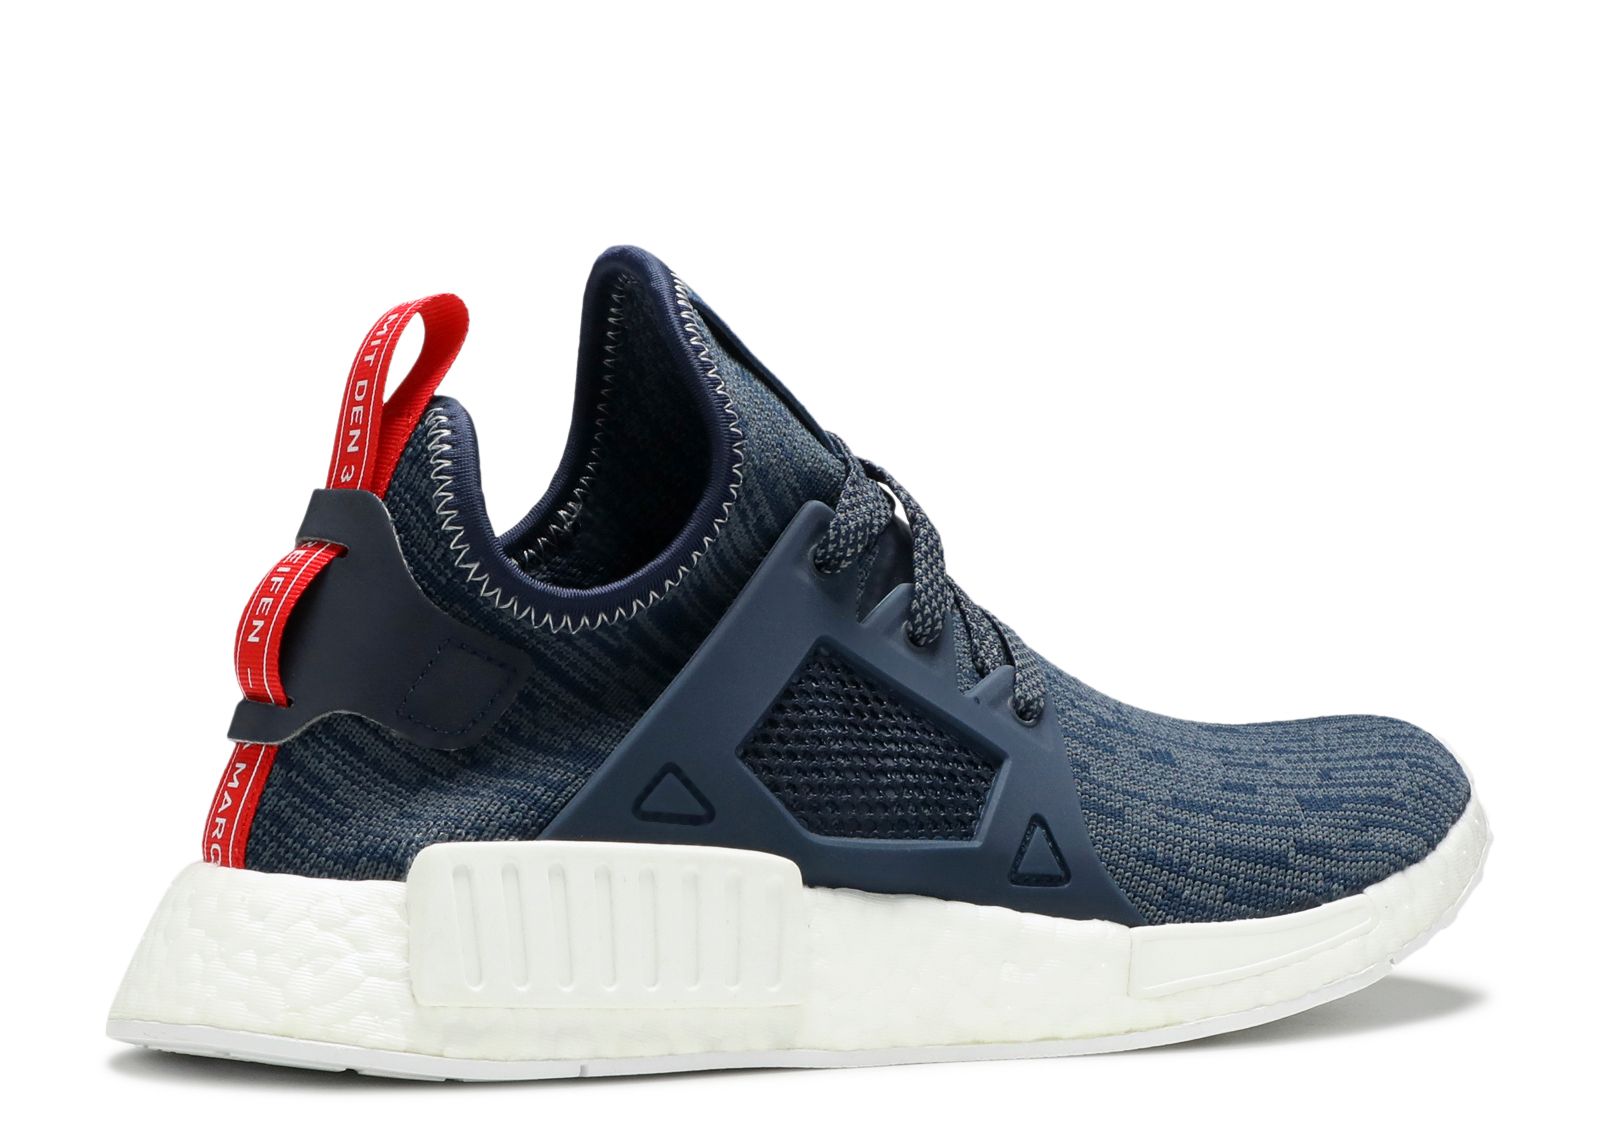 white adidas nmd xr1 shoes' good price January 202.